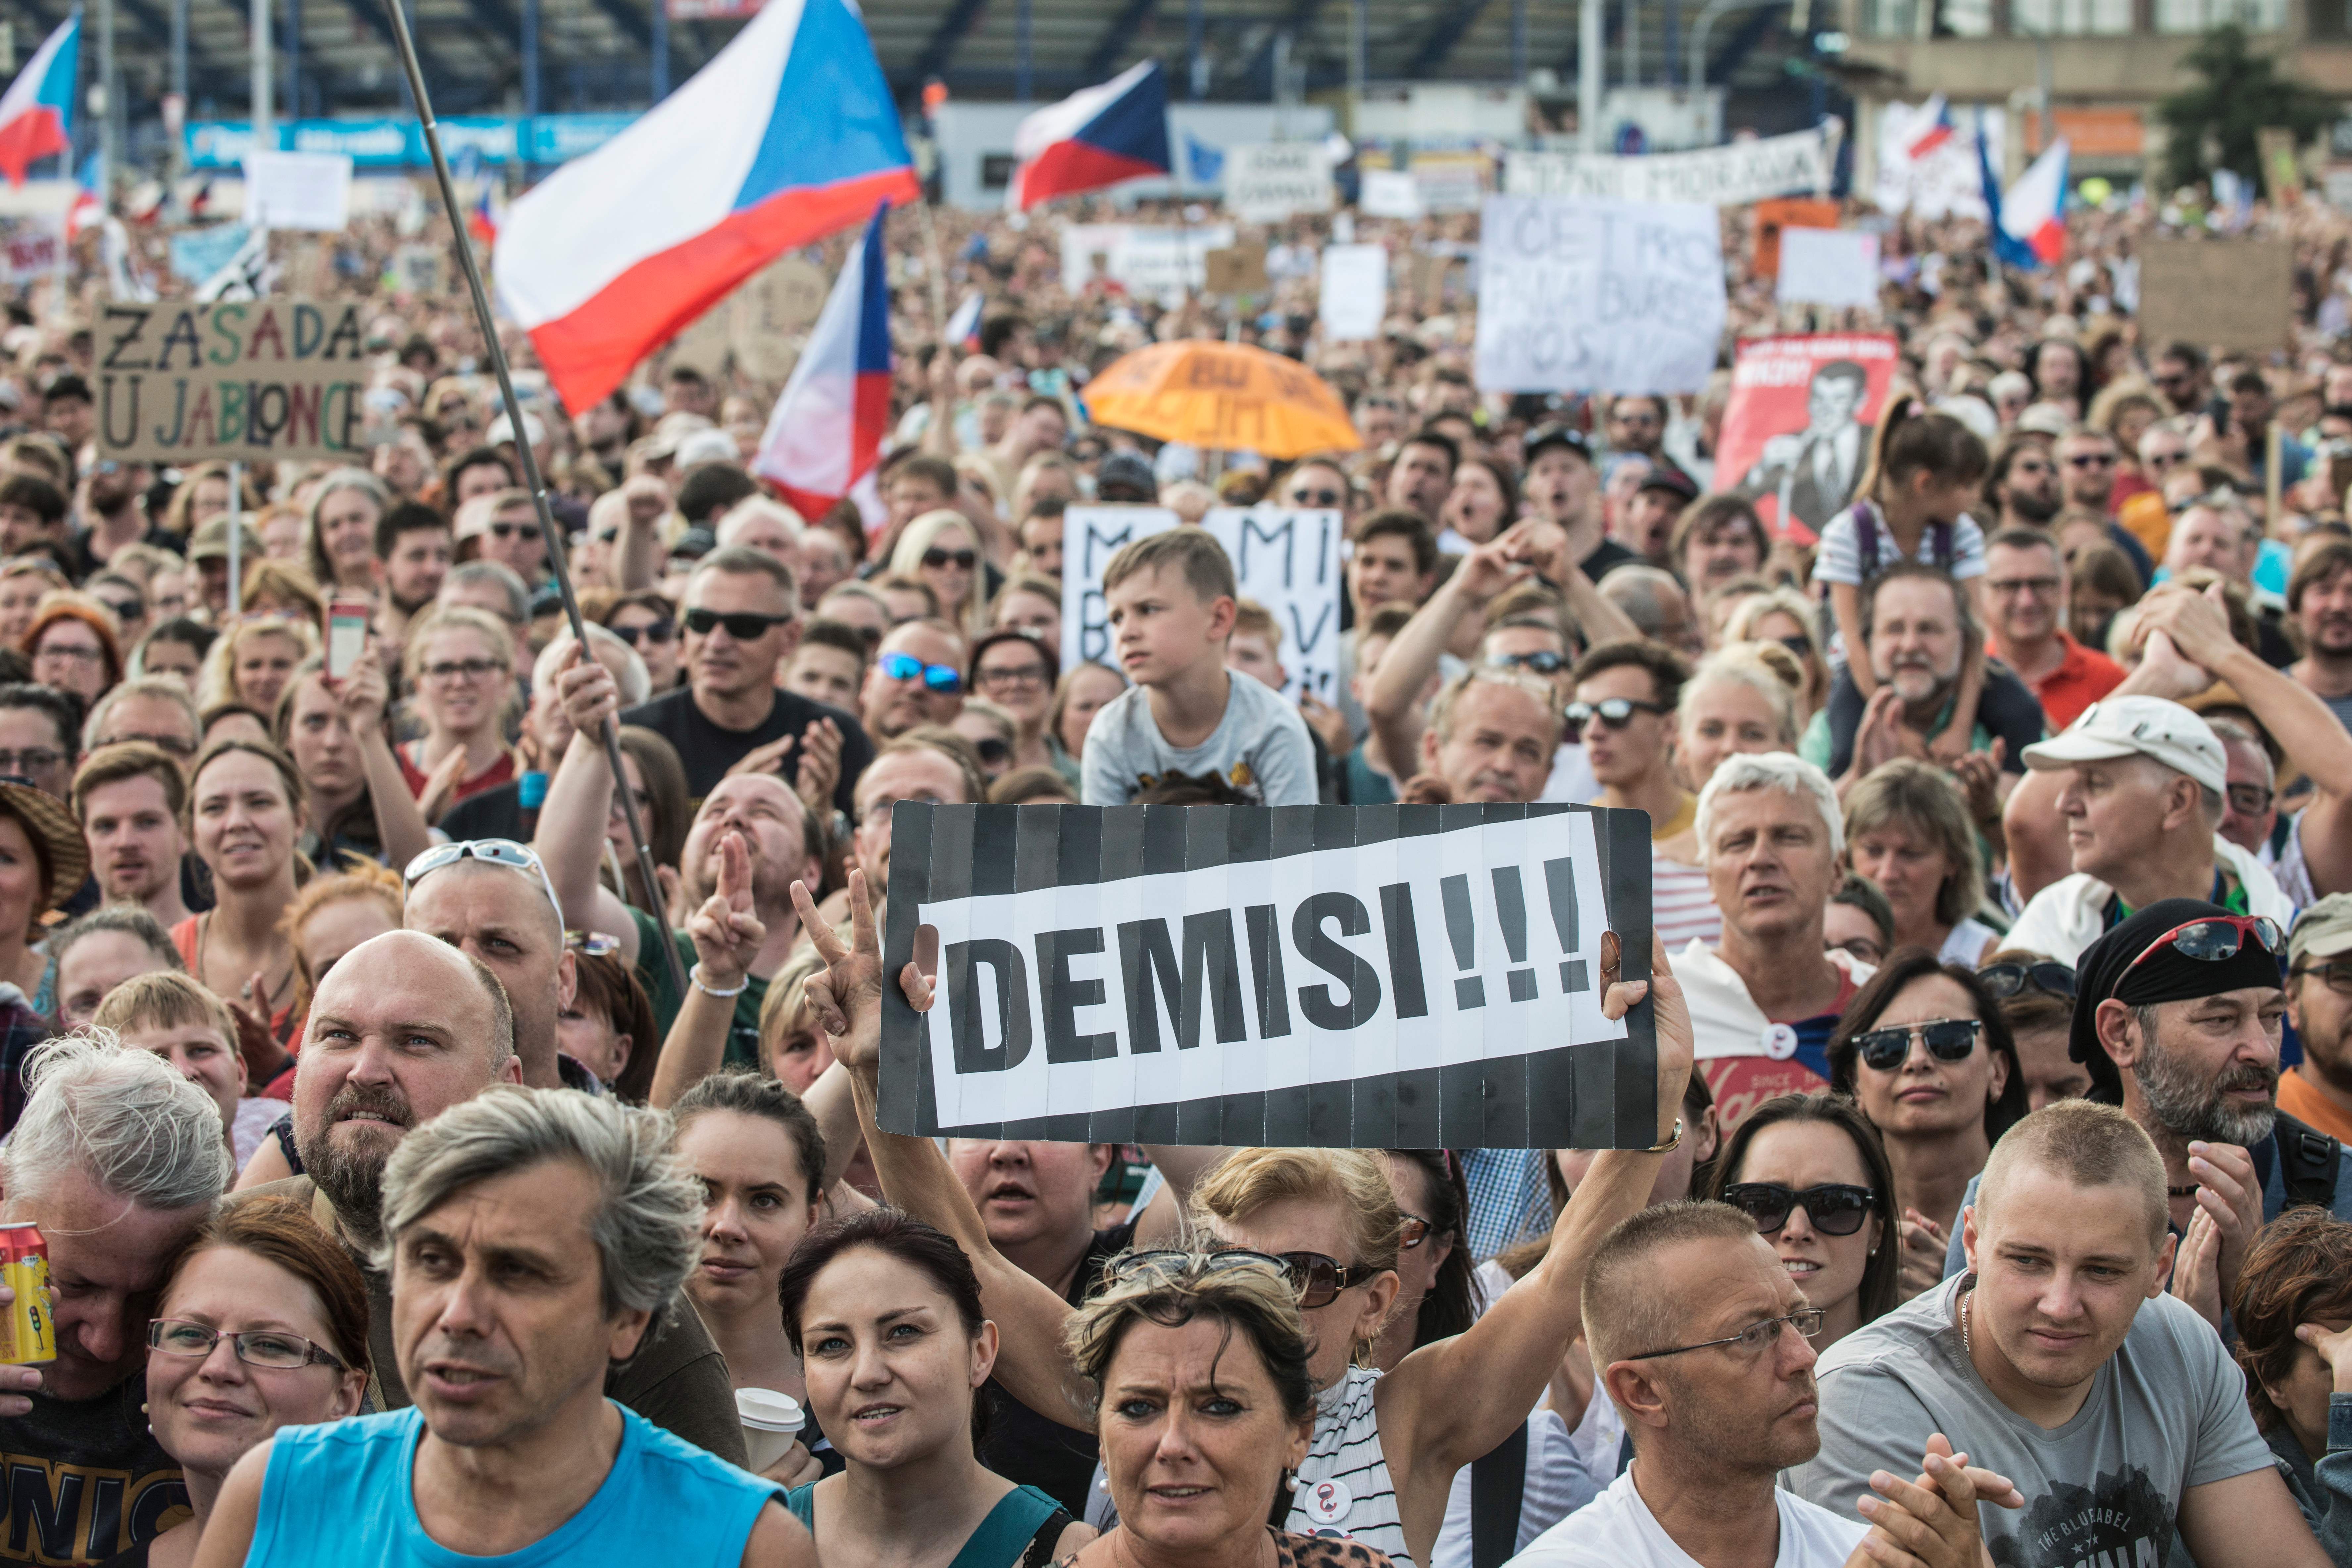  Protesters attend a rally demanding the resignation of Czech Prime Minister Andrej Babis on June 23, 2019 in Prague.